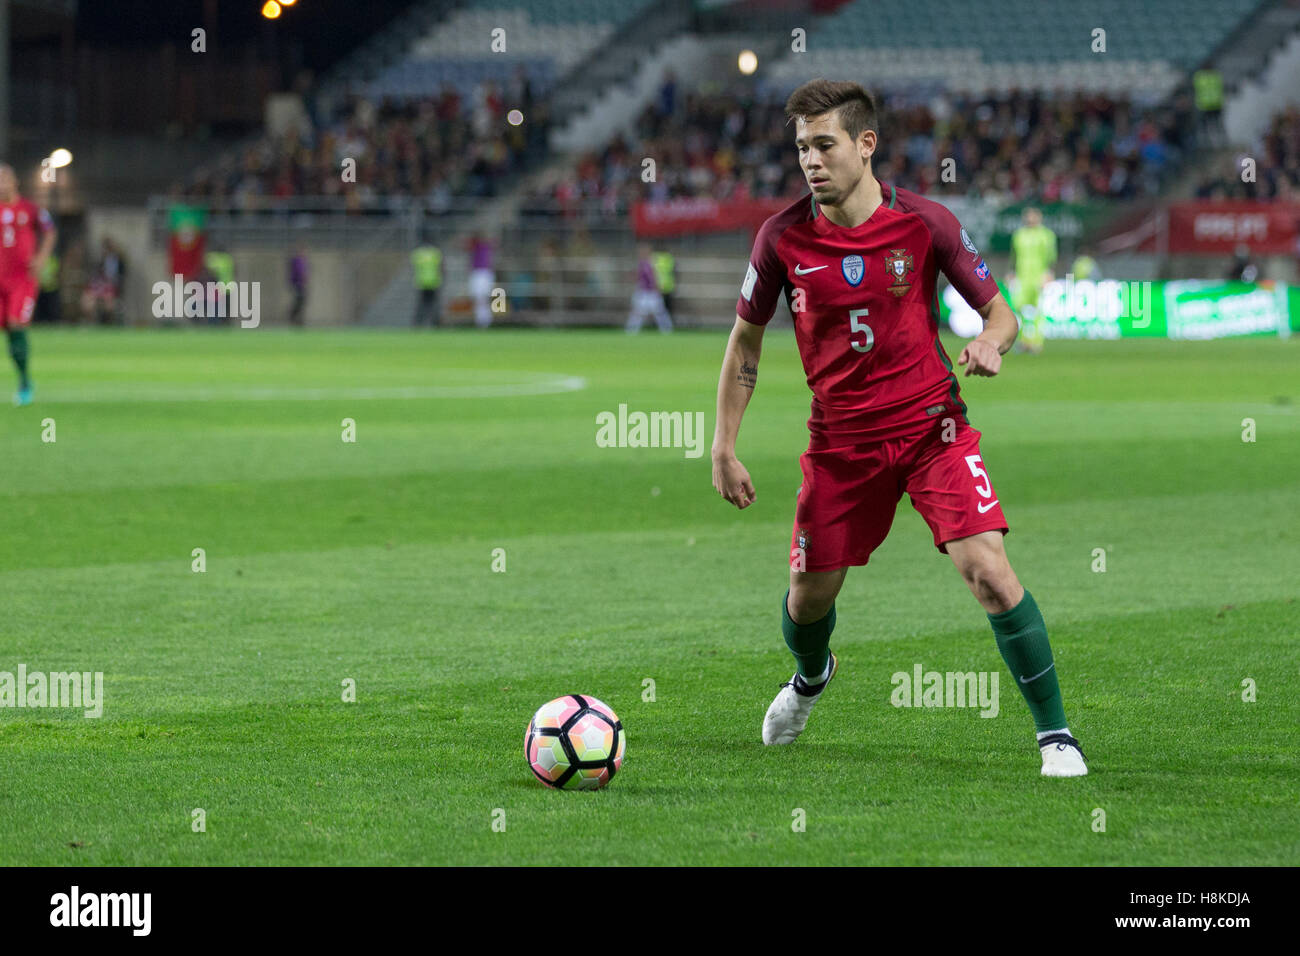 November 12, 2016. Loule, Portugal. PortugalÕs defender Raphael Guerreiro (5) during the FIFA 2018 World Cup Qualifier between Portugal and Latvia © Alexandre de Sousa/Alamy Live News Stock Photo